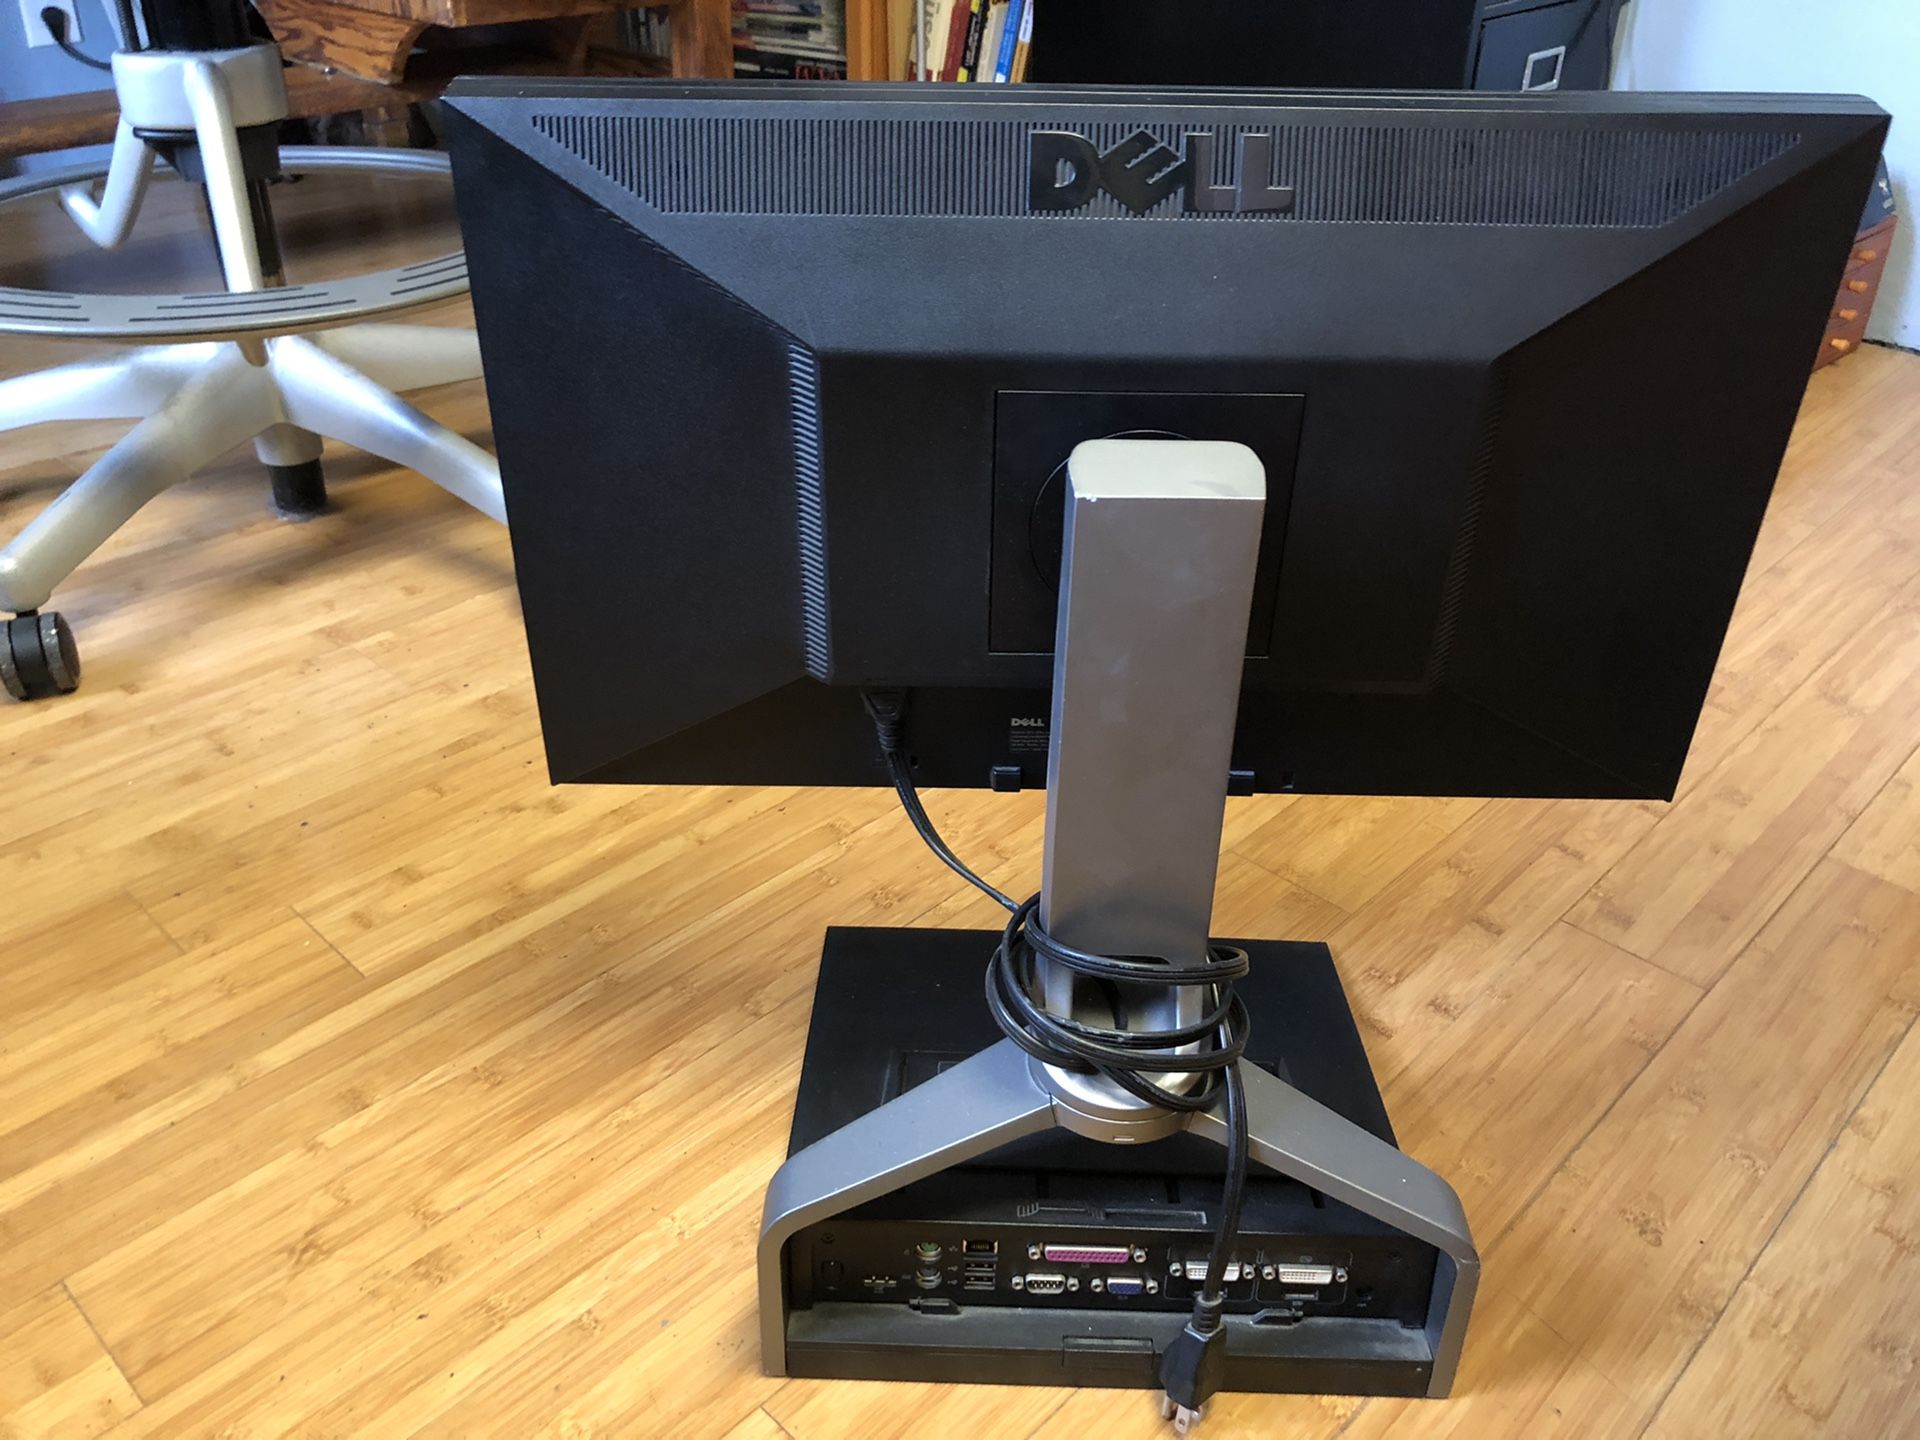 23” Dell monitor with PR02x docking station